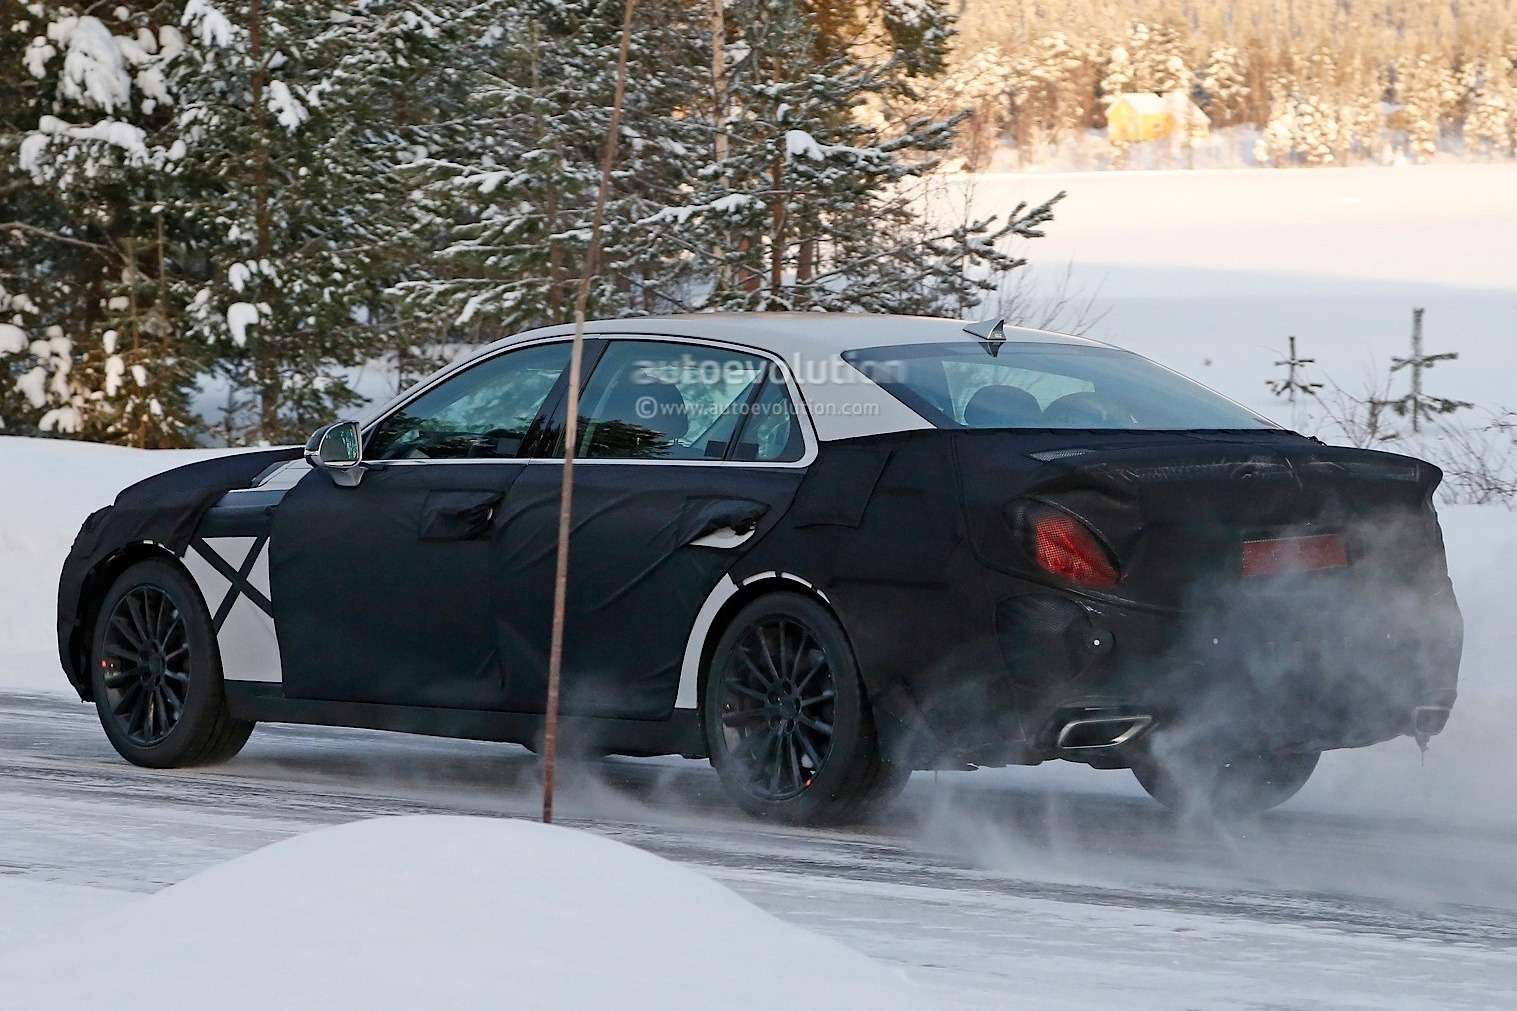 spyshots-2016-hyundai-equus-spied-with-s-class-inspired-taillights_8